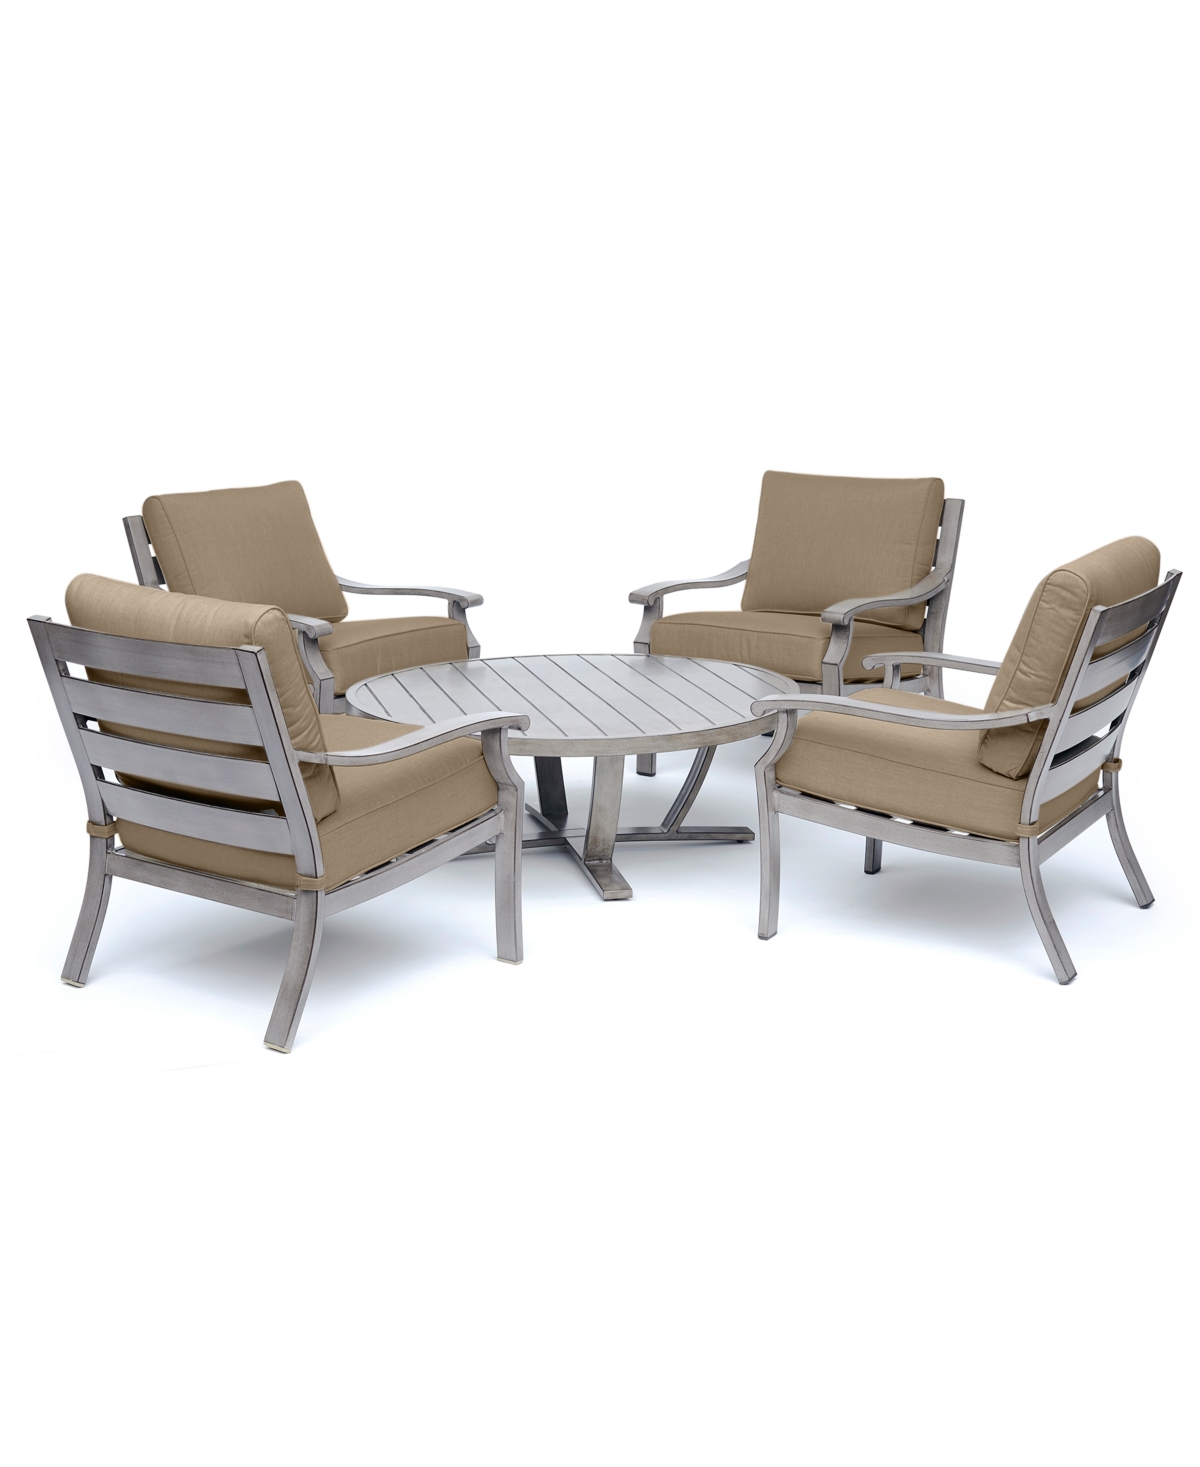 Agio Tara Aluminum Outdoor 5-pc. Seating Set (48" Round Table & 4 Club Chairs), Created For Macy's In Outdura Remy Pebble